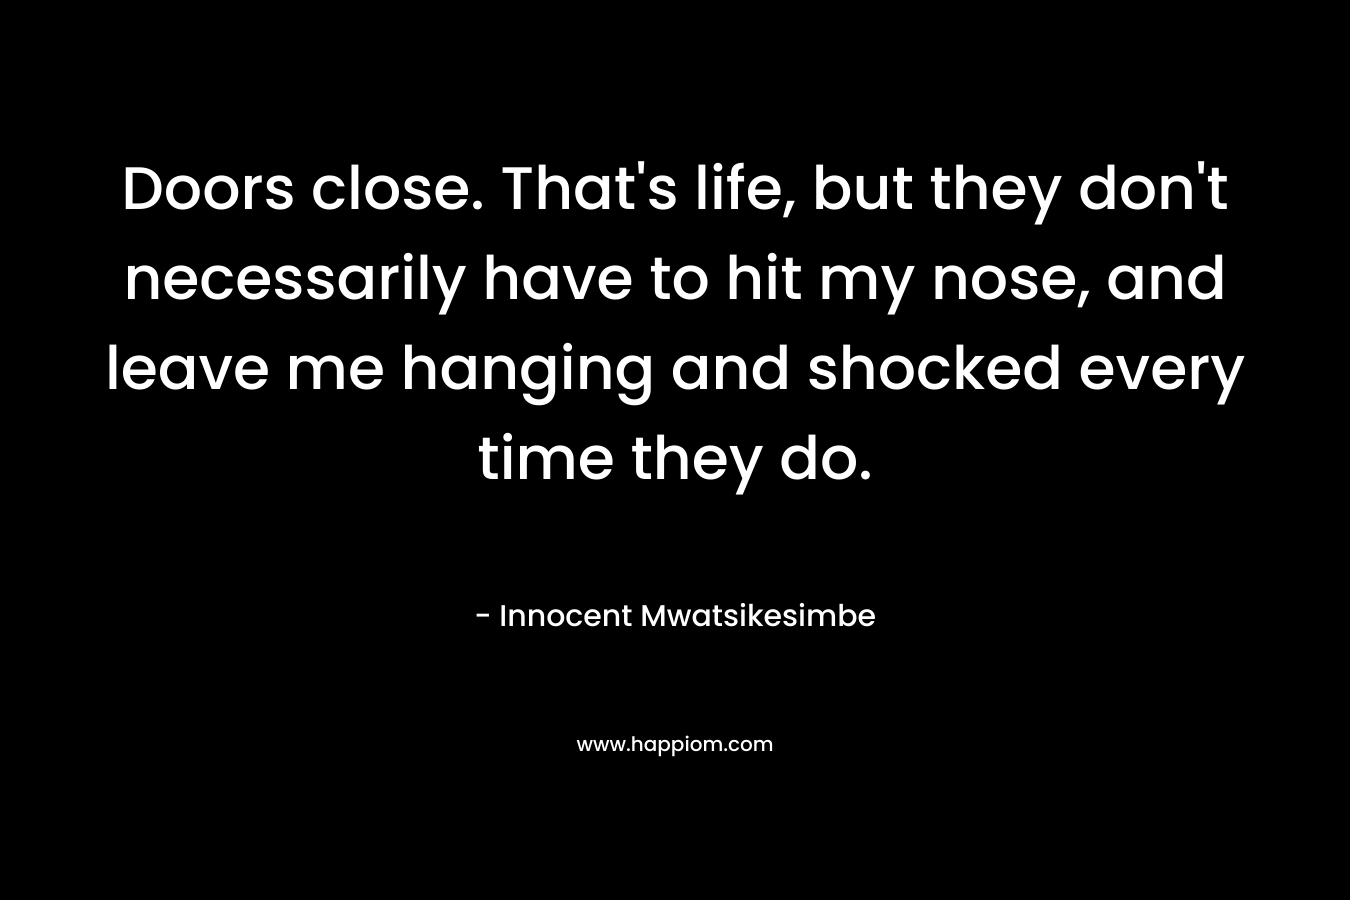 Doors close. That’s life, but they don’t necessarily have to hit my nose, and leave me hanging and shocked every time they do. – Innocent Mwatsikesimbe